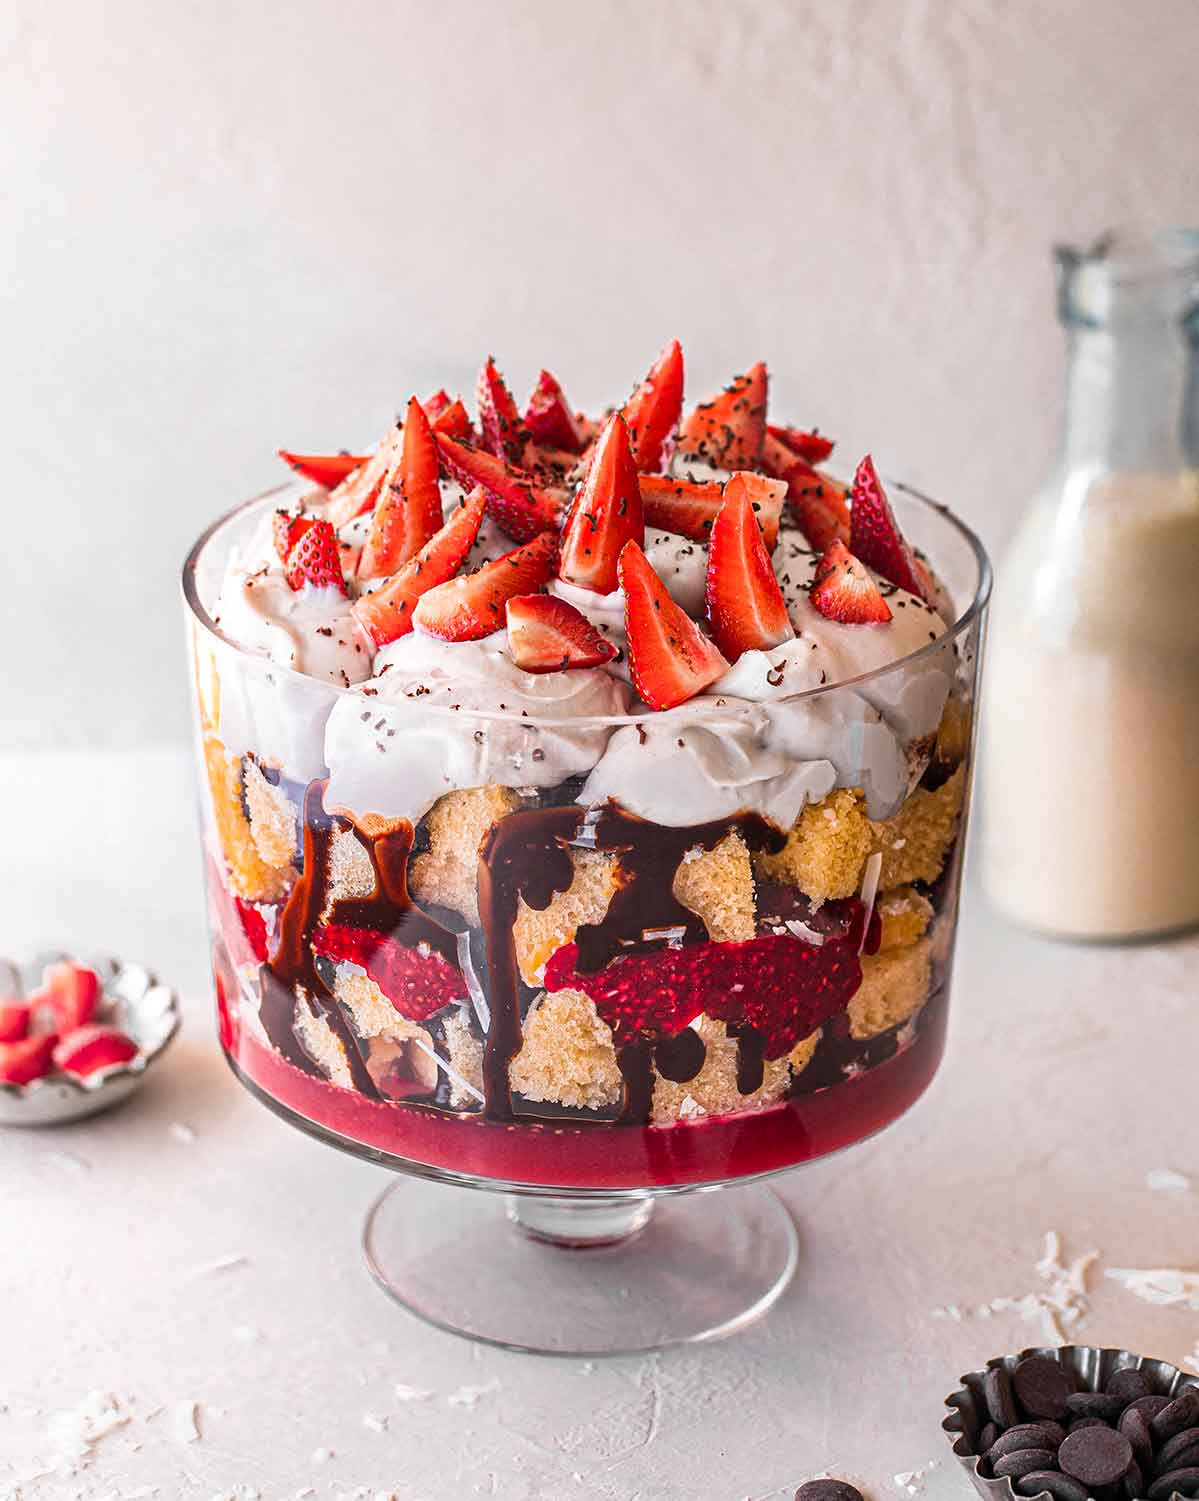 Lamington trifle in a tall clear glass showing different coloured and textured layers.